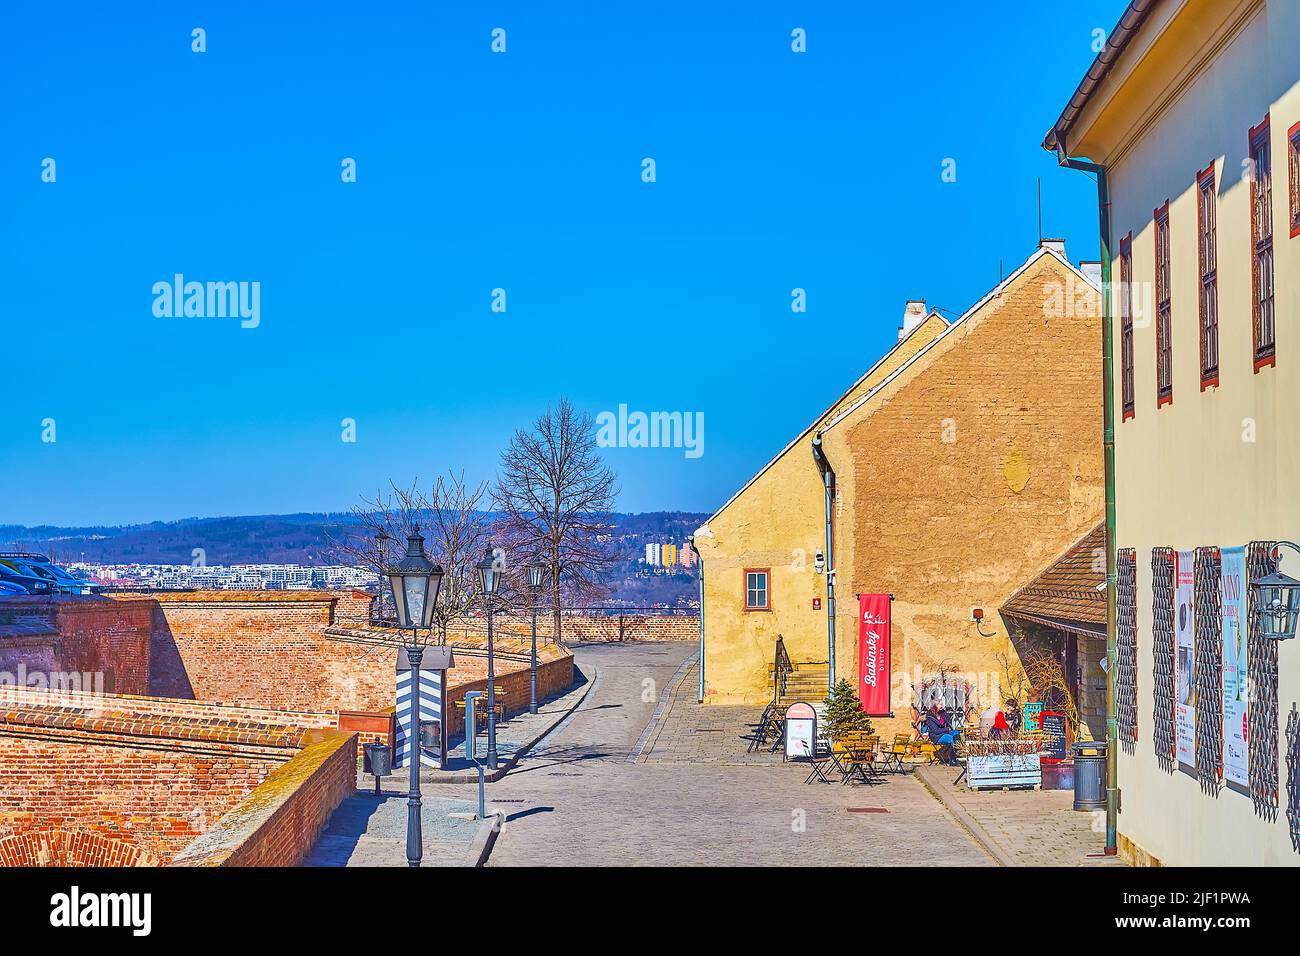 BRNO, CZECH REPUBLIC - MARCH 10, 2022: Visit small restaurant on the outer yard of Spilberk citadel, on March 10 in Brno, Czech Republic Stock Photo